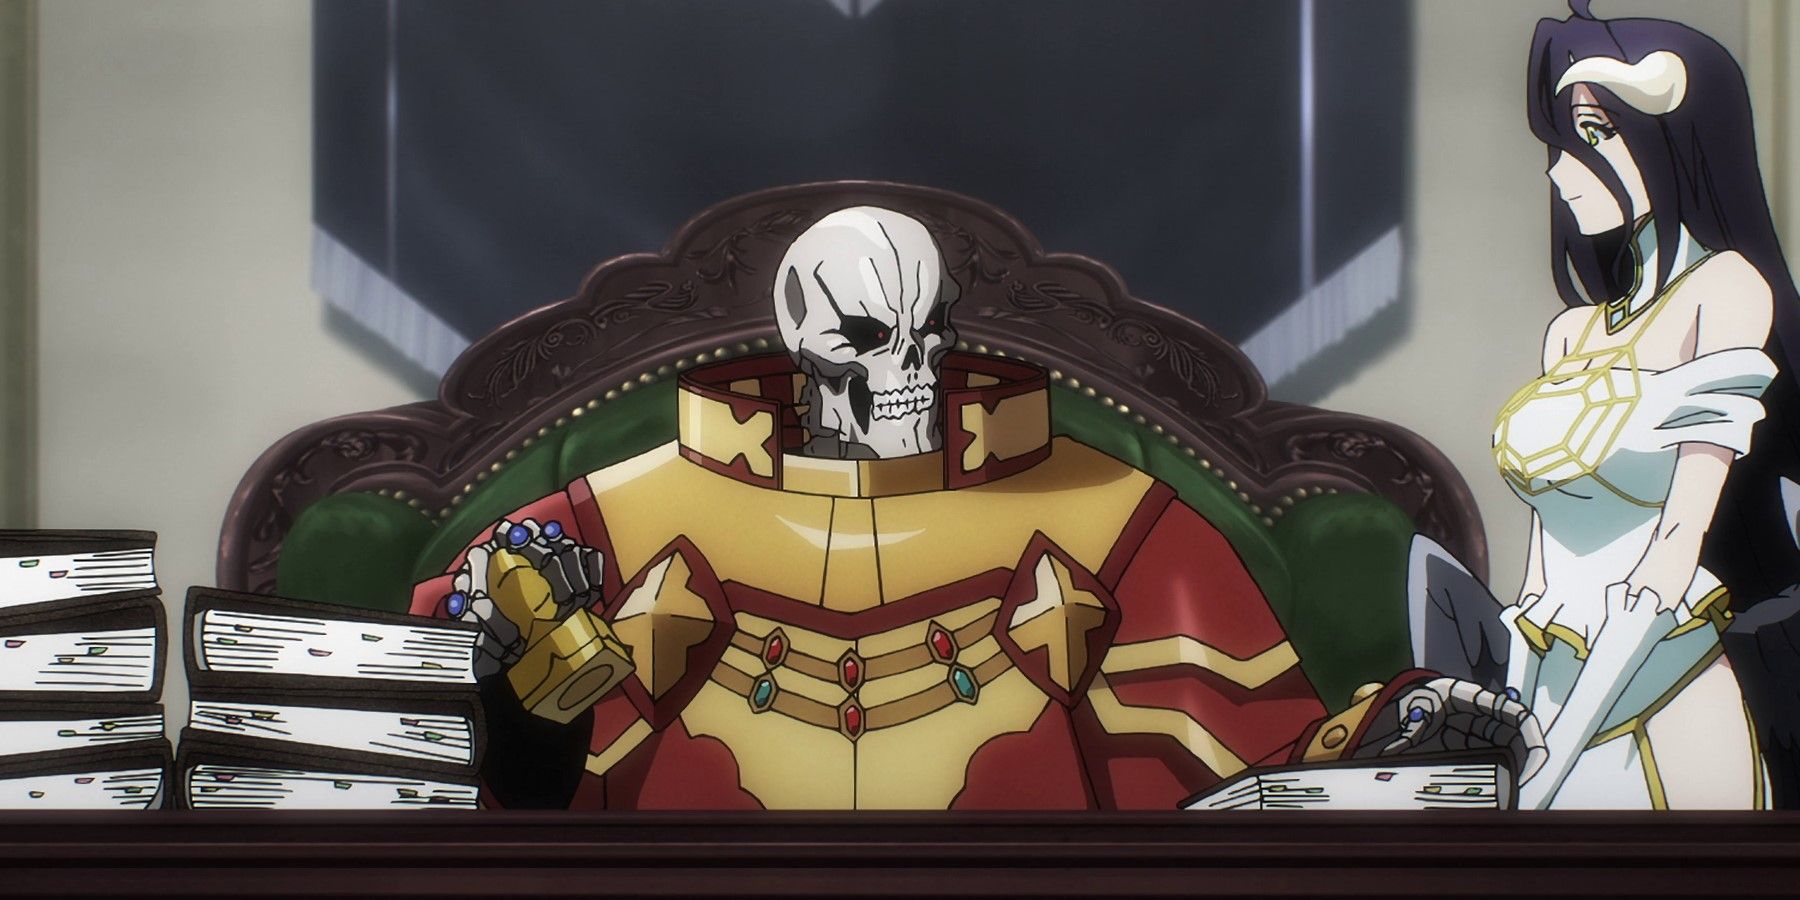 Overlord season 4 episode 13: Release date, time, and what to expect